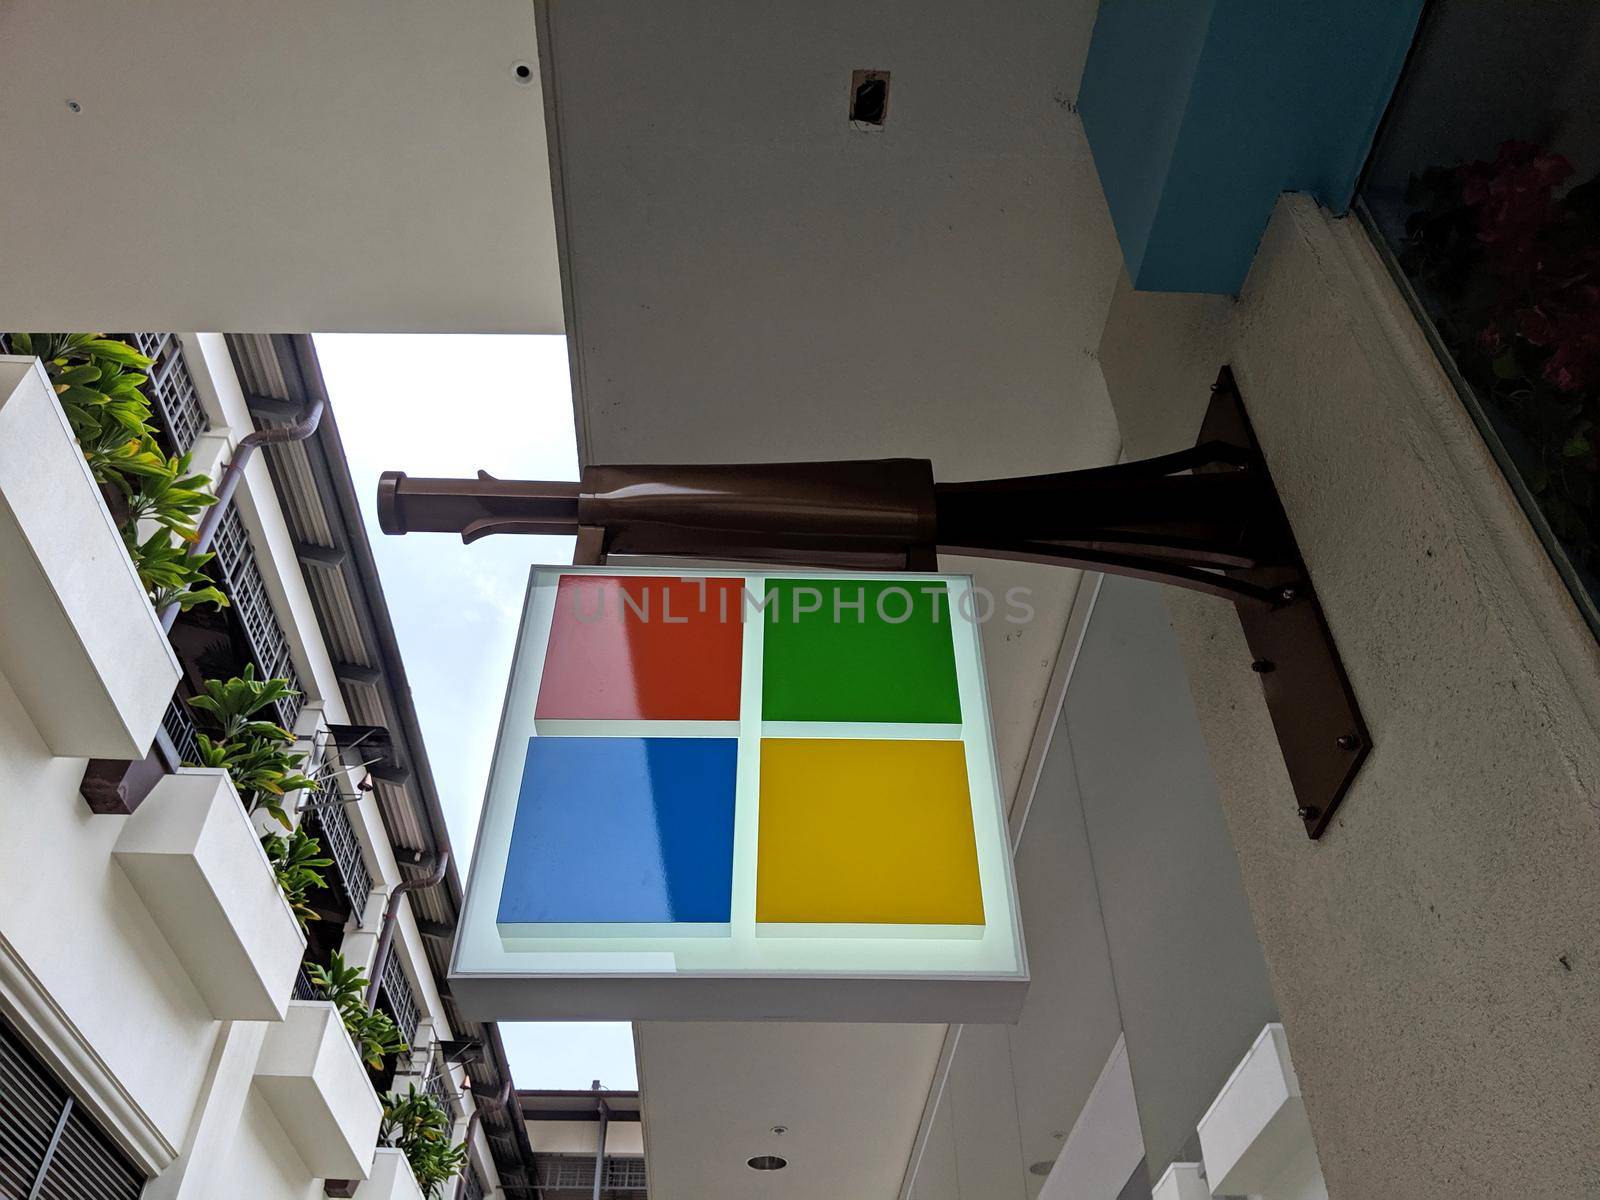 Honolulu - August 30, 2019: Microsoft store sign logo featuring window with four colors orange, blue, yellow, and green in Ala Moana Mall.  